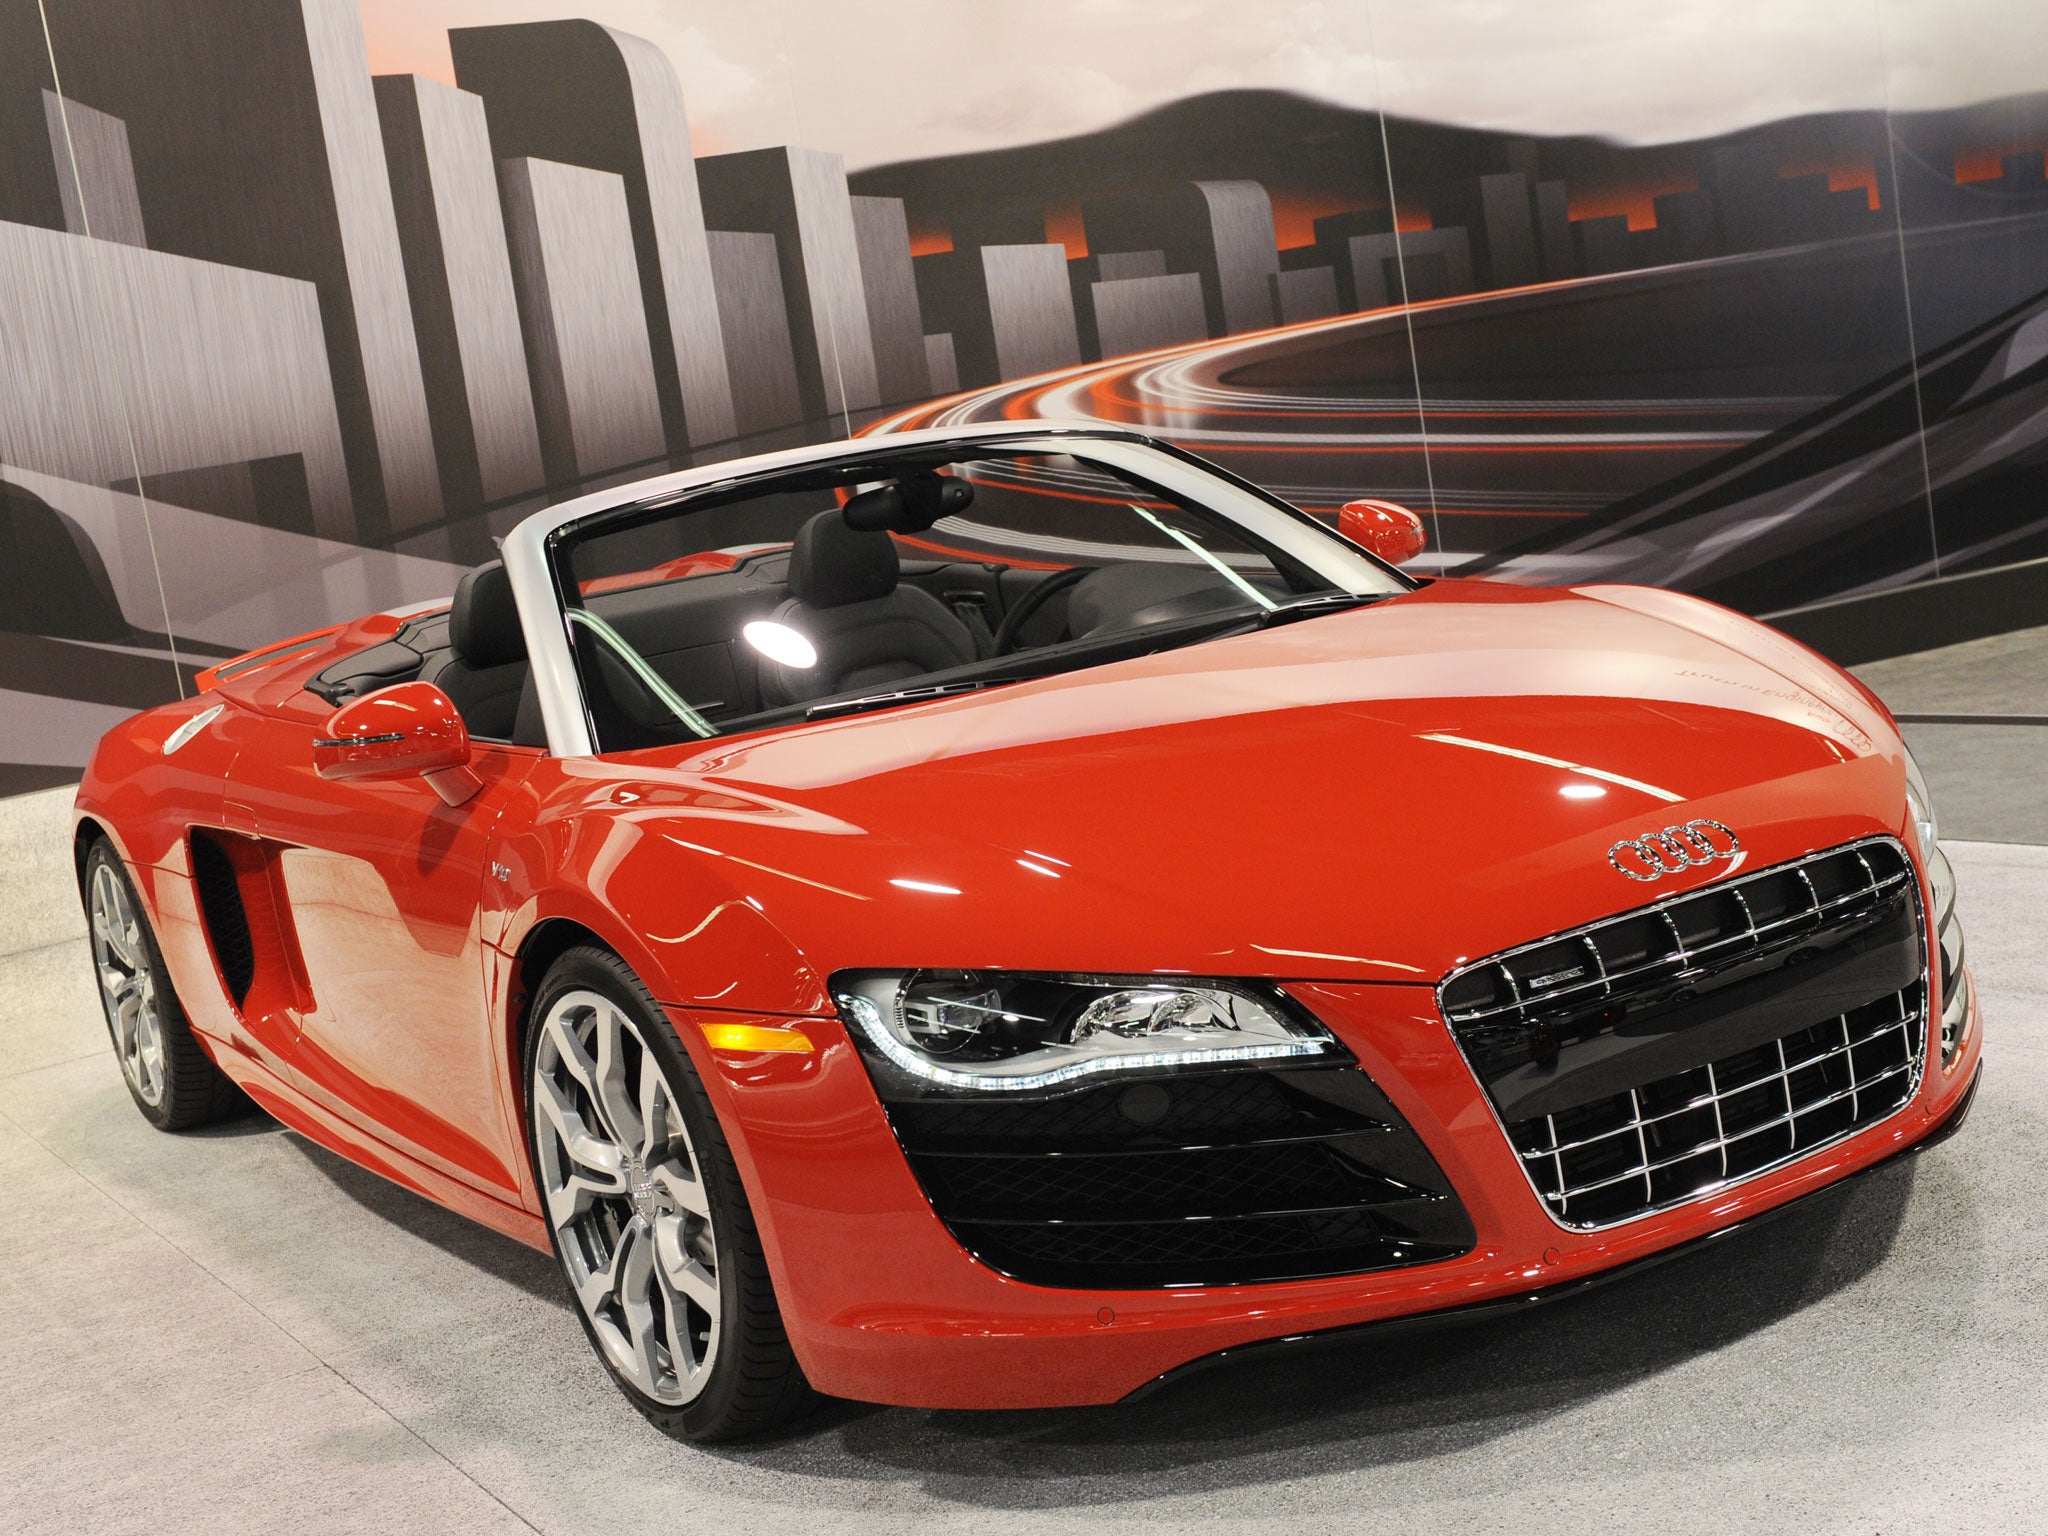 An Audi R8, similar to the car David Pickup was driving when he was caught speeding